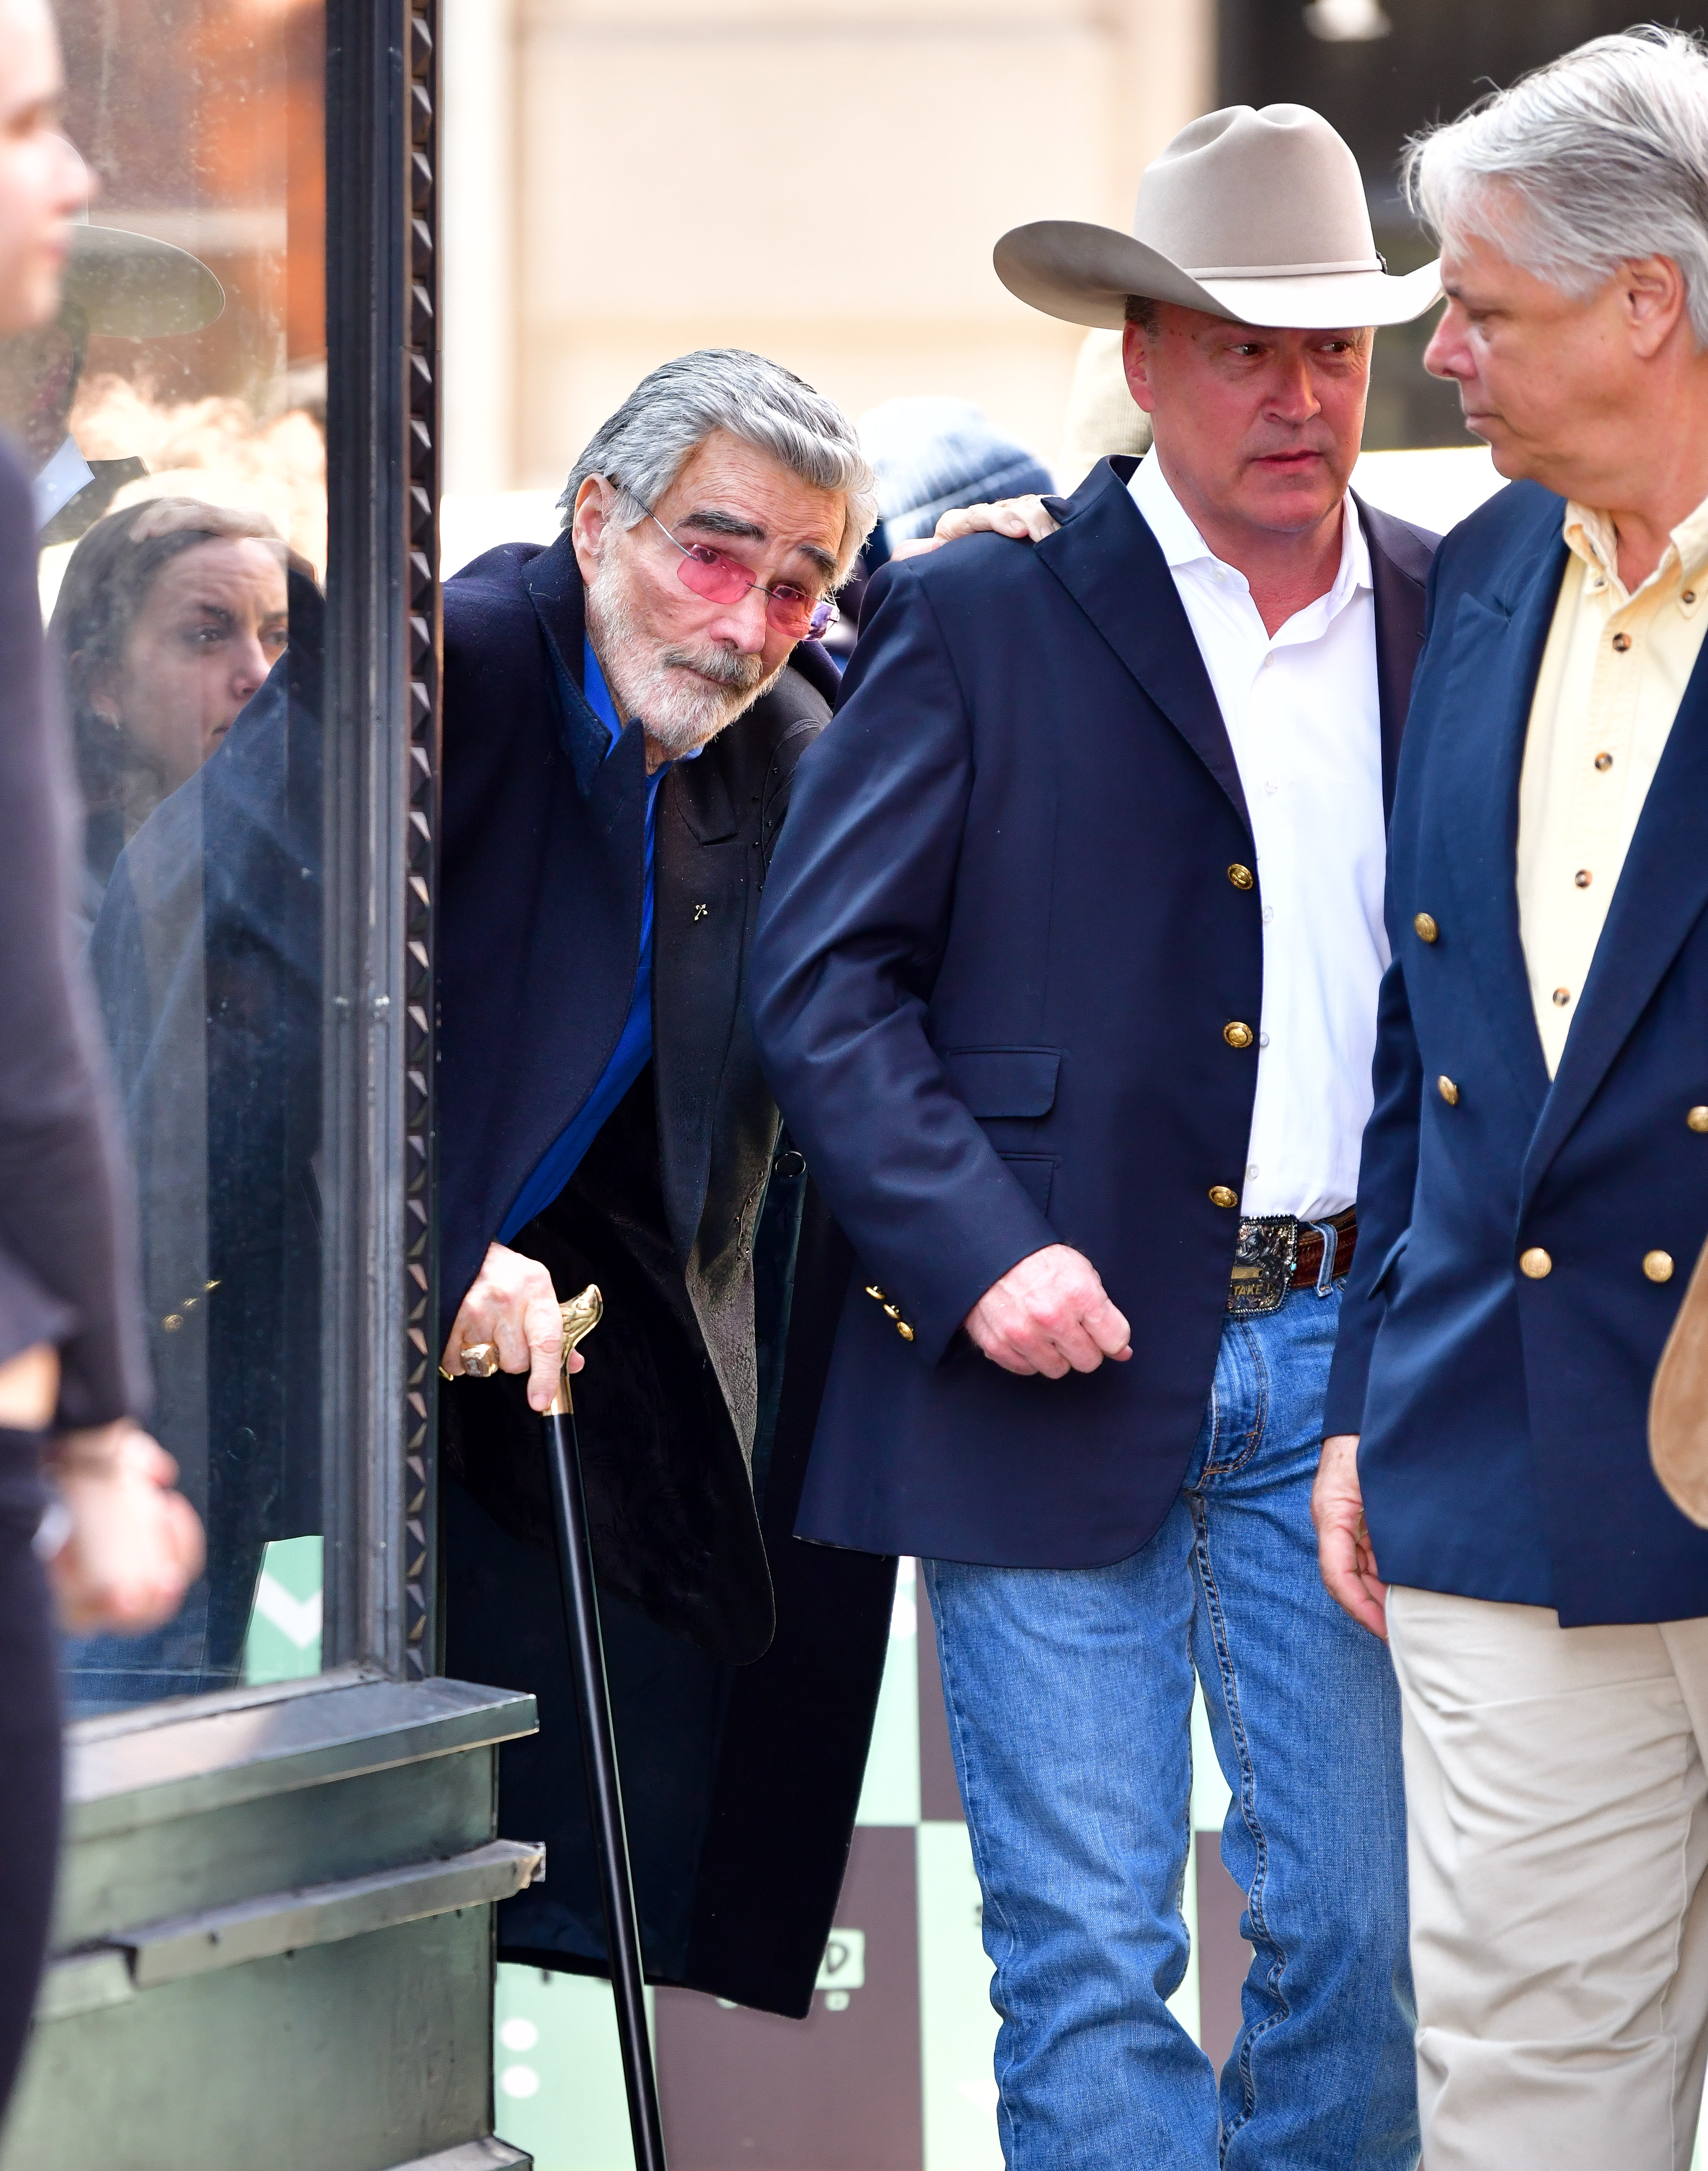 Burt Reynolds in New York in 2018 | Source: Getty Images